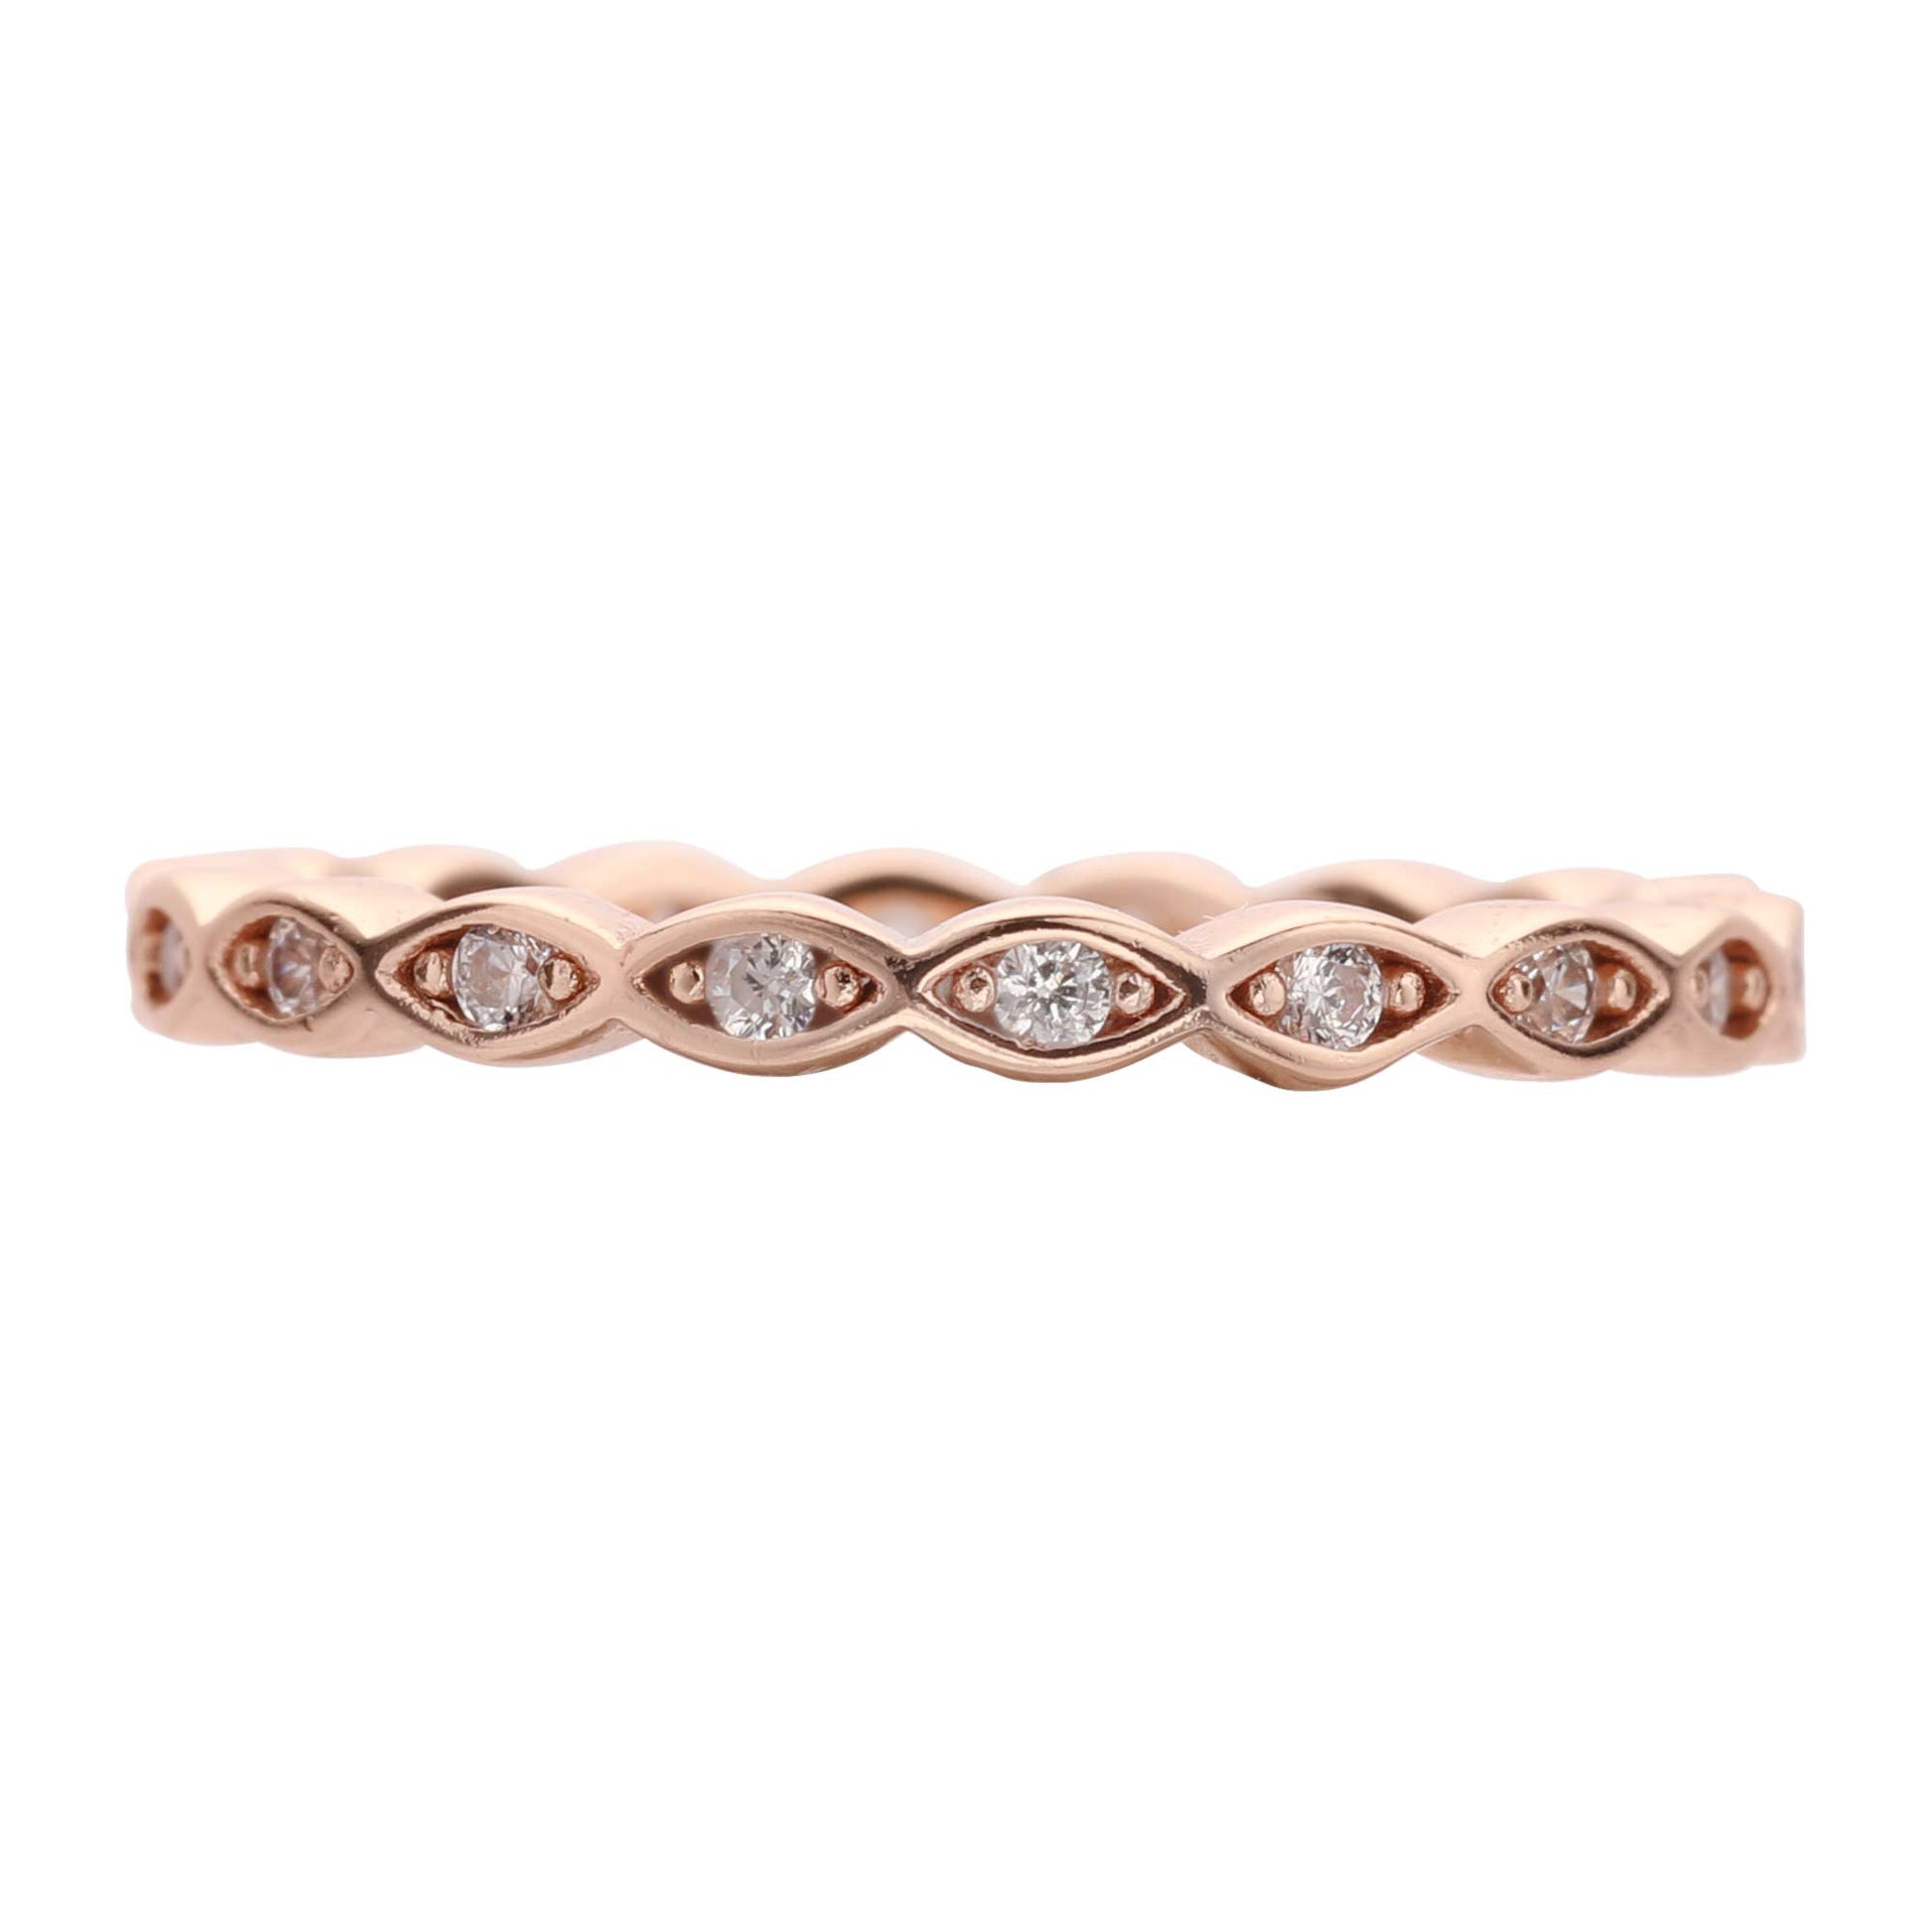 A rose gold scalloped ring band set with small clear stones.